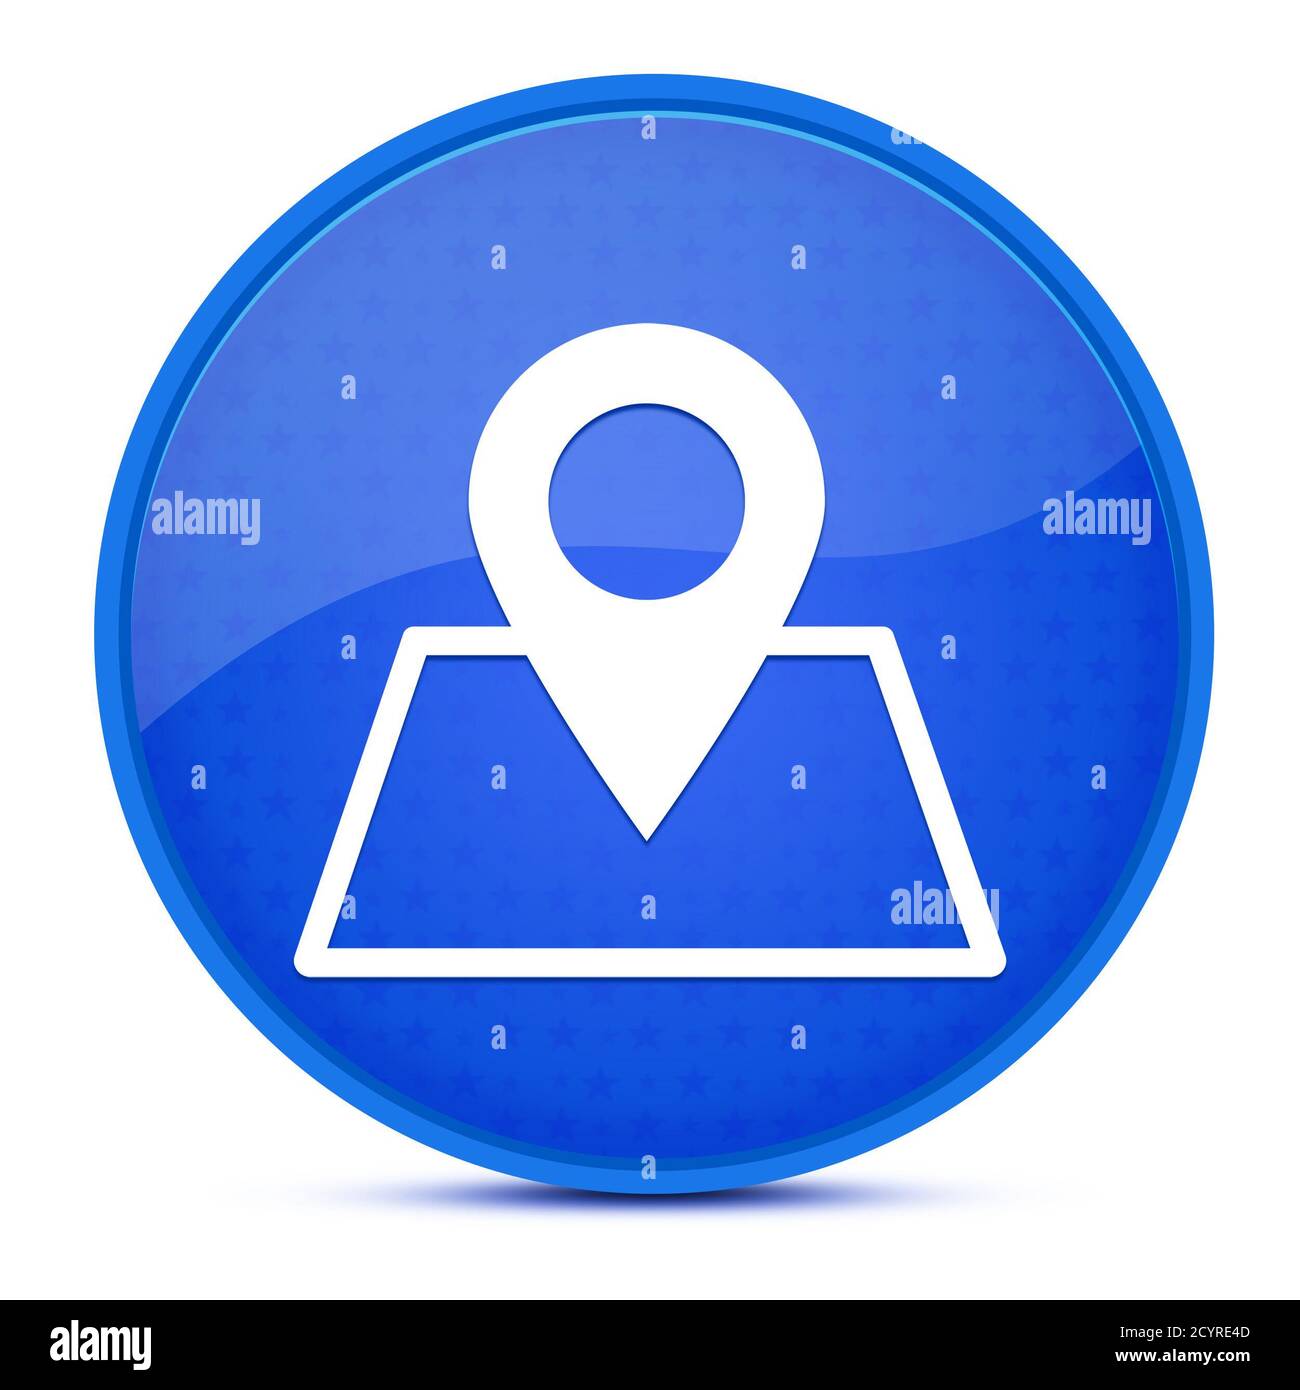 Map point aesthetic glossy blue round button abstract illustration Stock Photo